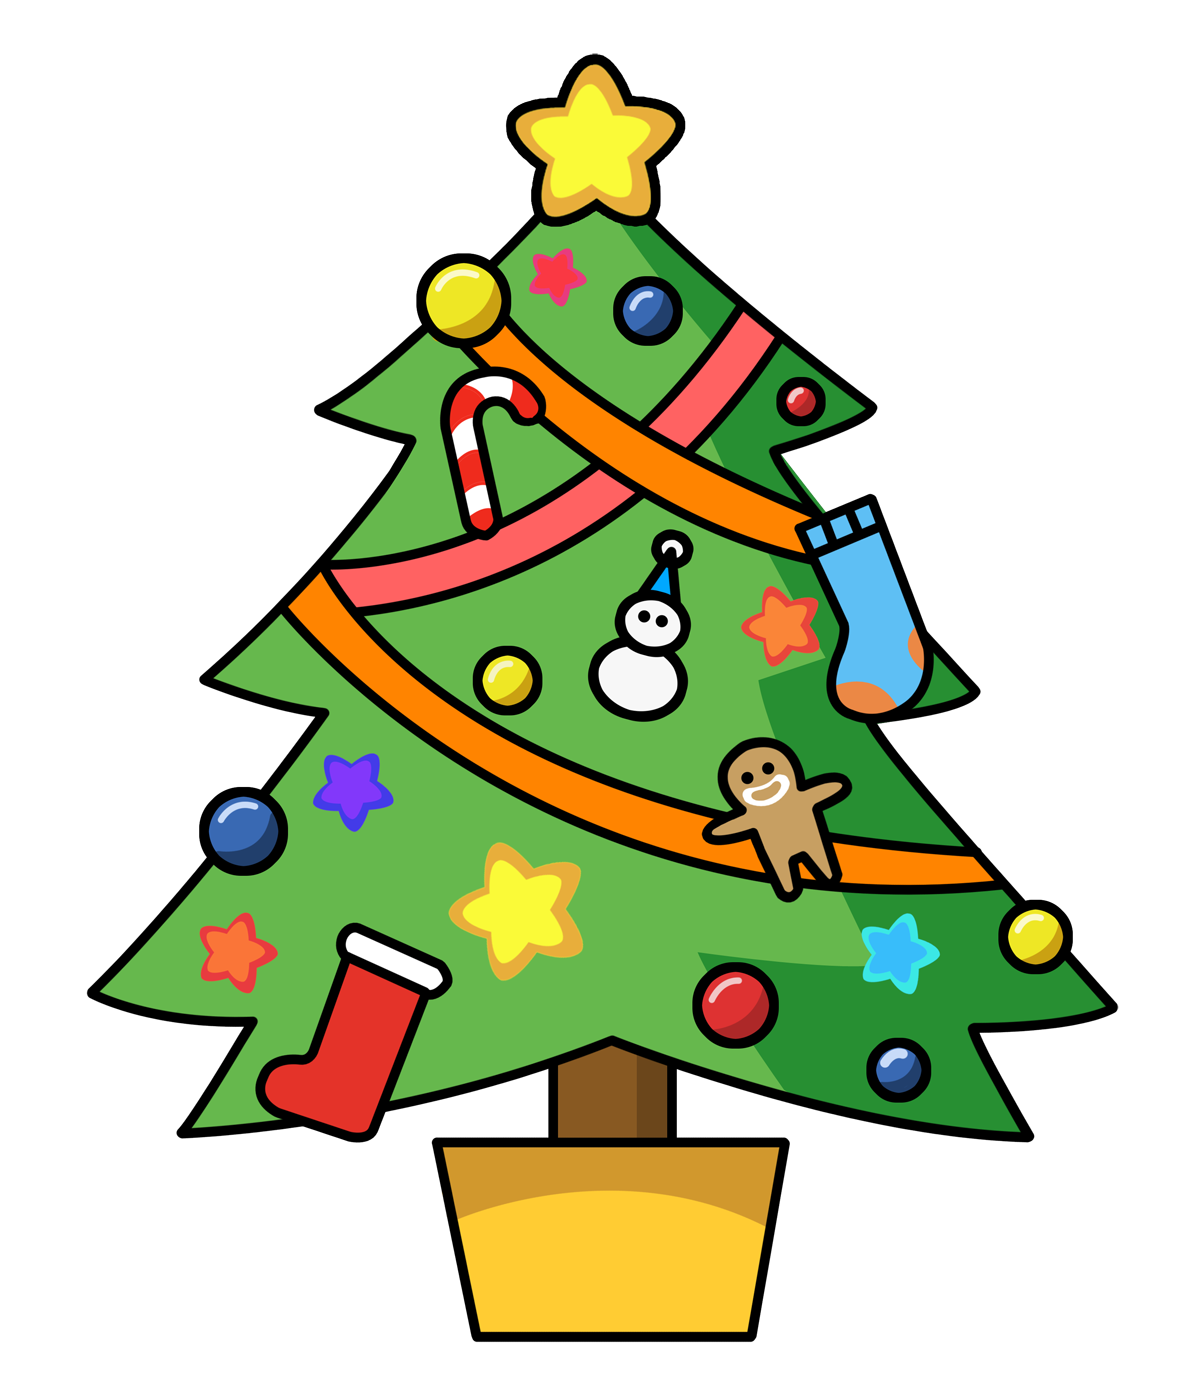 Dog Snowman Tree Clipart Outline Image Gallery Christmas Tree ...